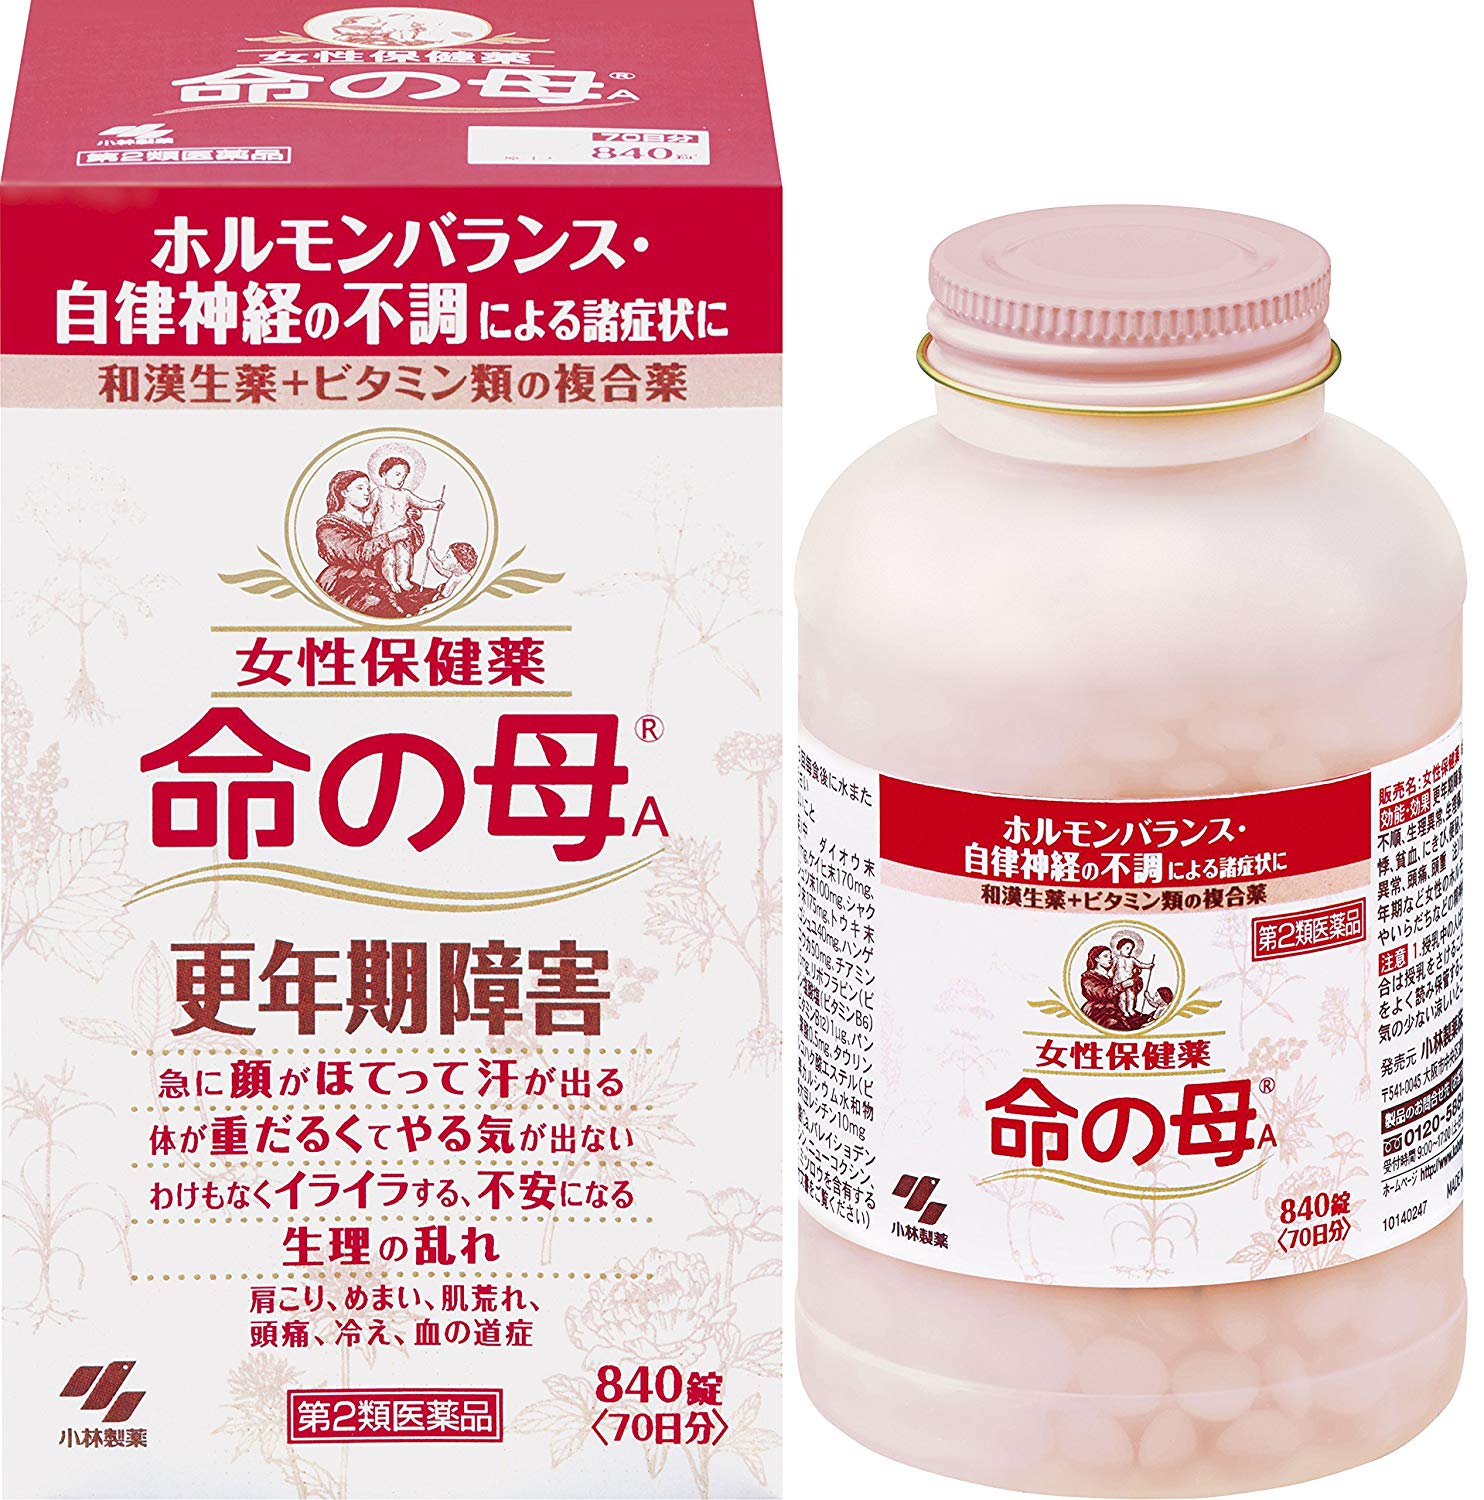 INOCHI NO HAHA - a complex for restoring and maintaining a hormonal balance in women, for 70 days